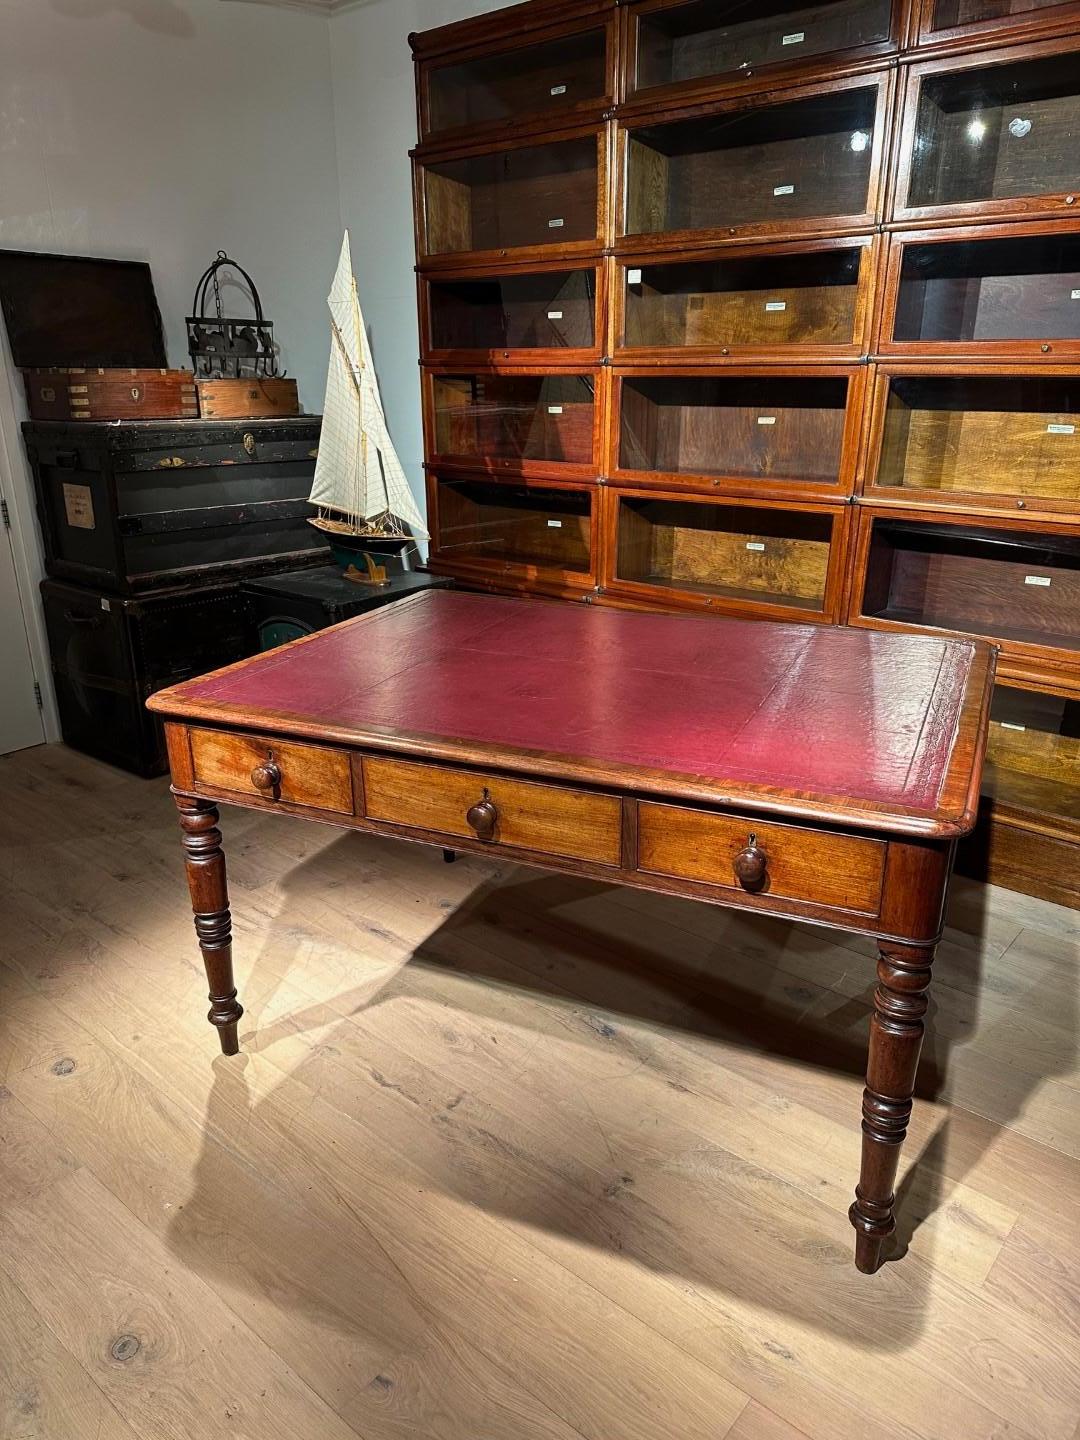 Antique mahogany writing table with 3 drawers on both sides. The table has a Bordeaux red leather top. Beautiful  patina and warm color of the mahogany. The table is in good and completely original condition.

Origin: England
Period: Approx.